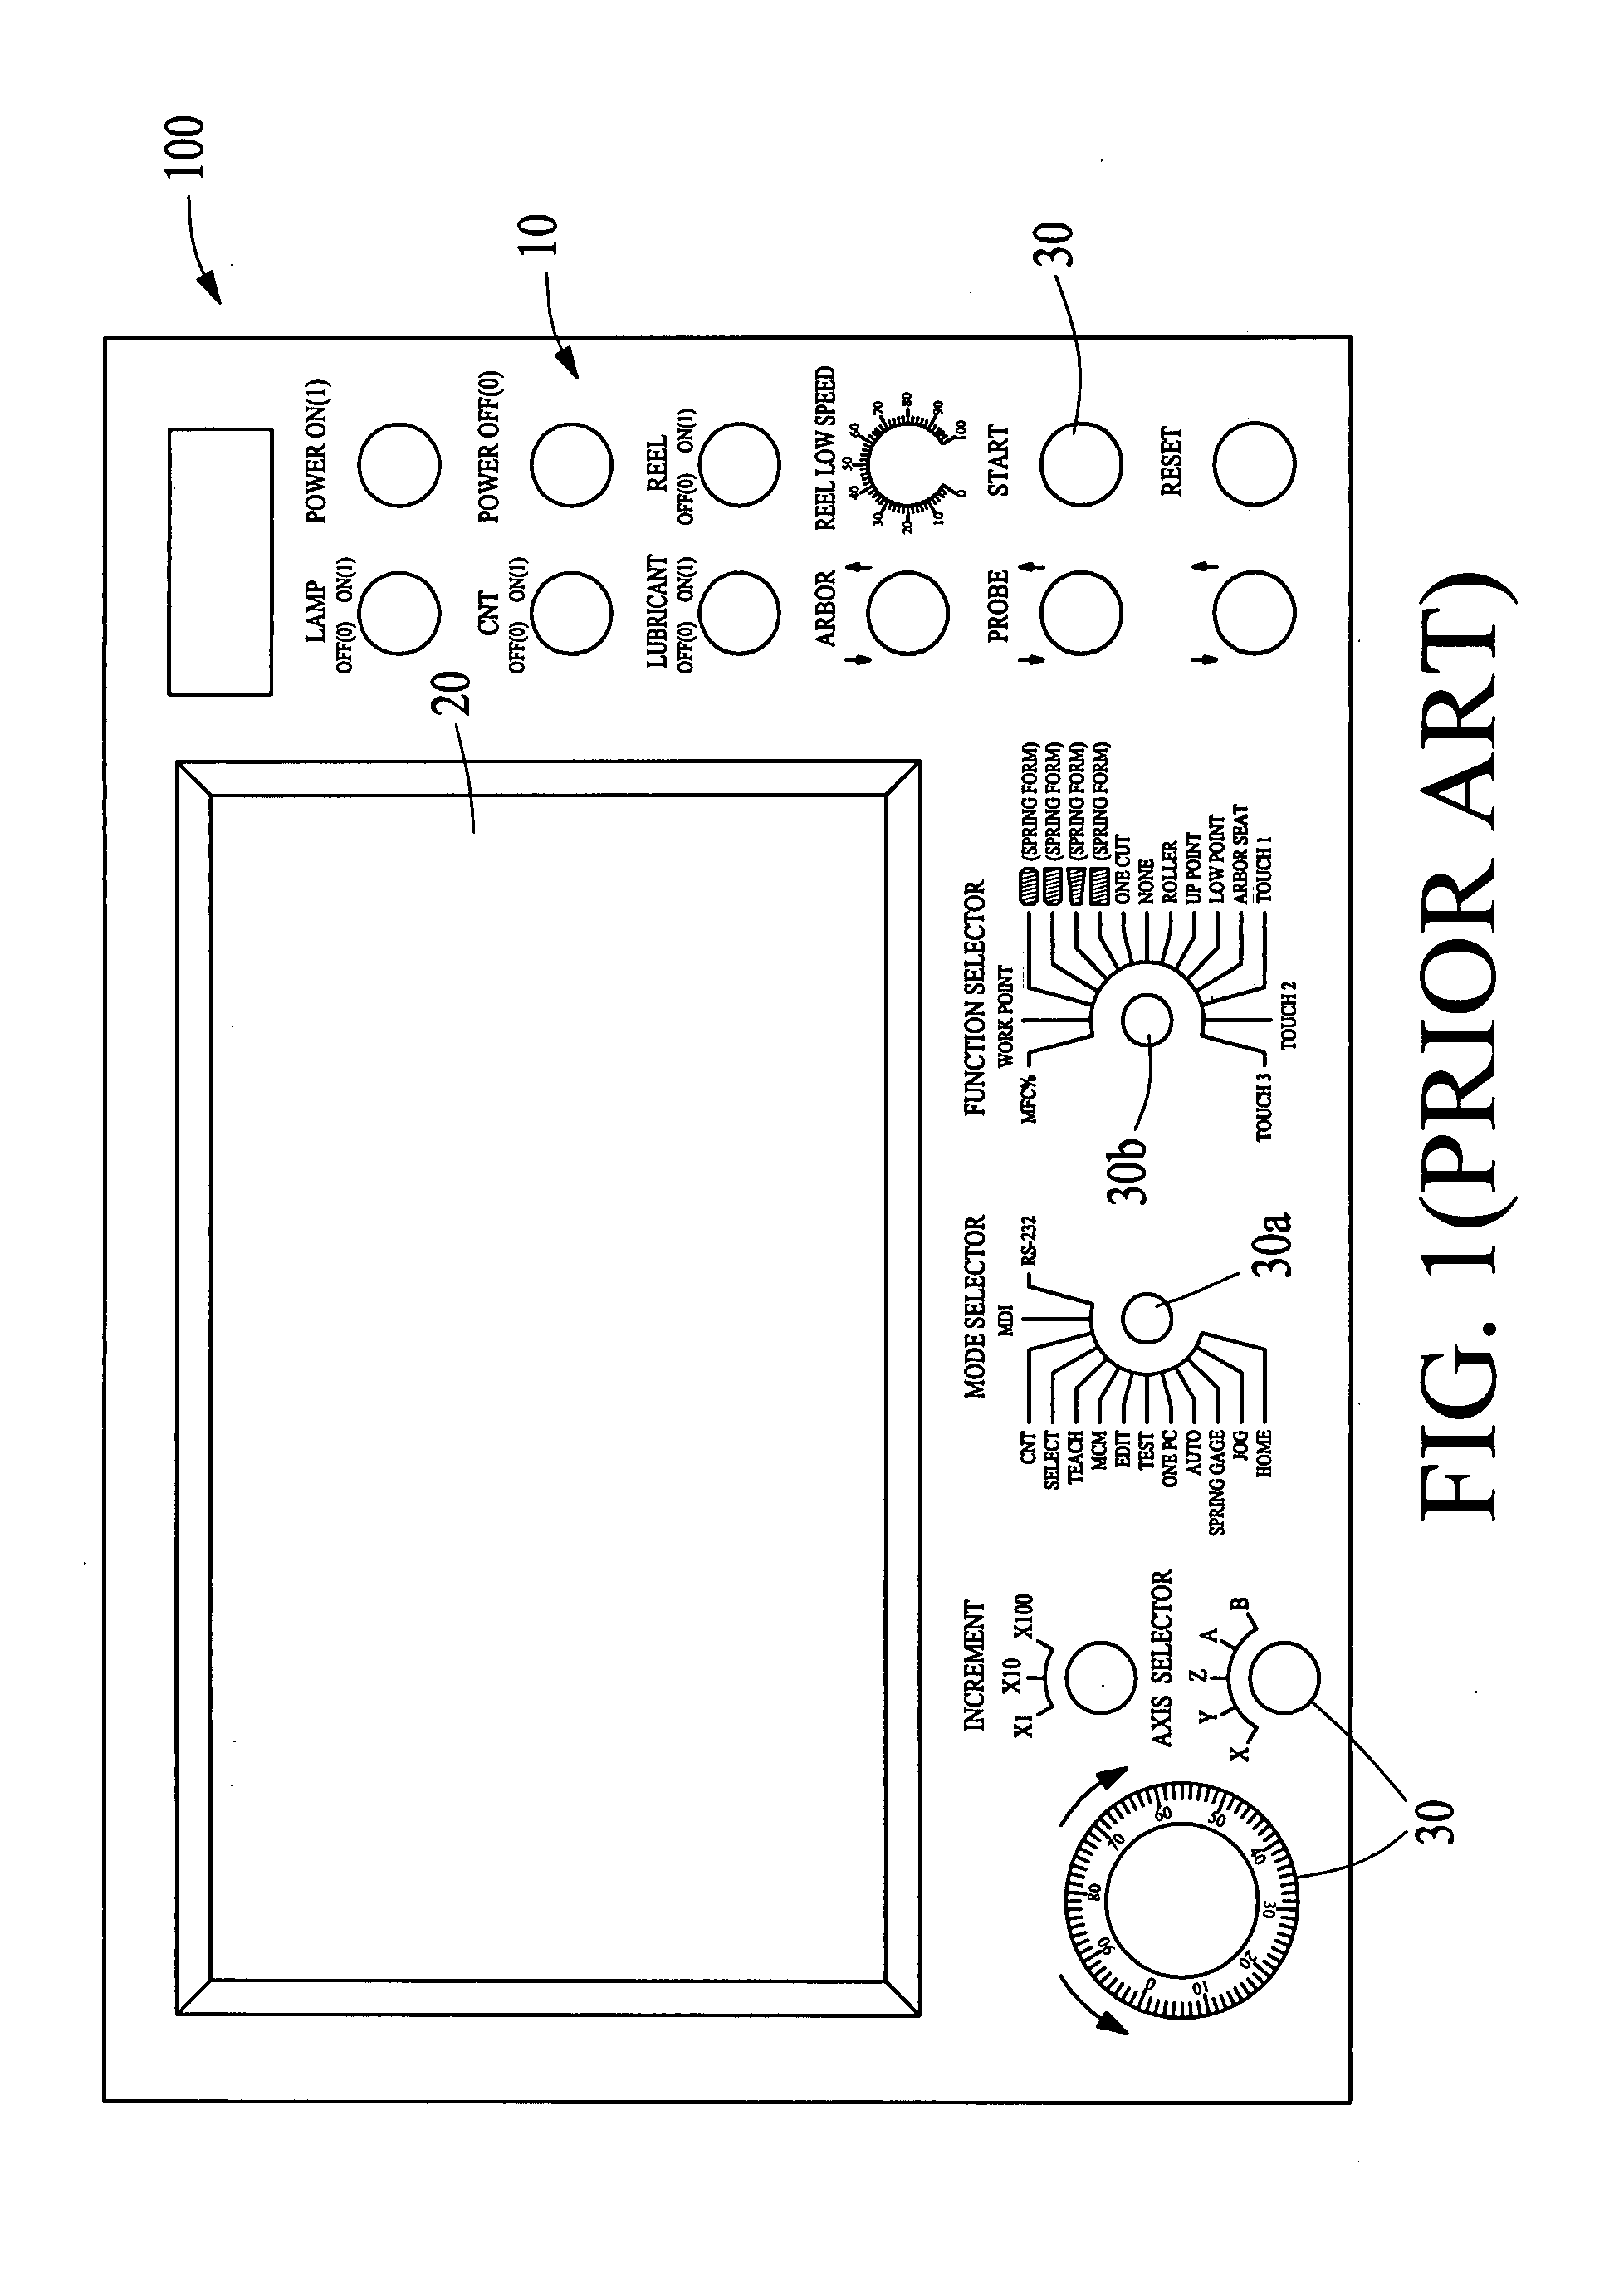 Spring-forming control system and its control method for a spring forming machine